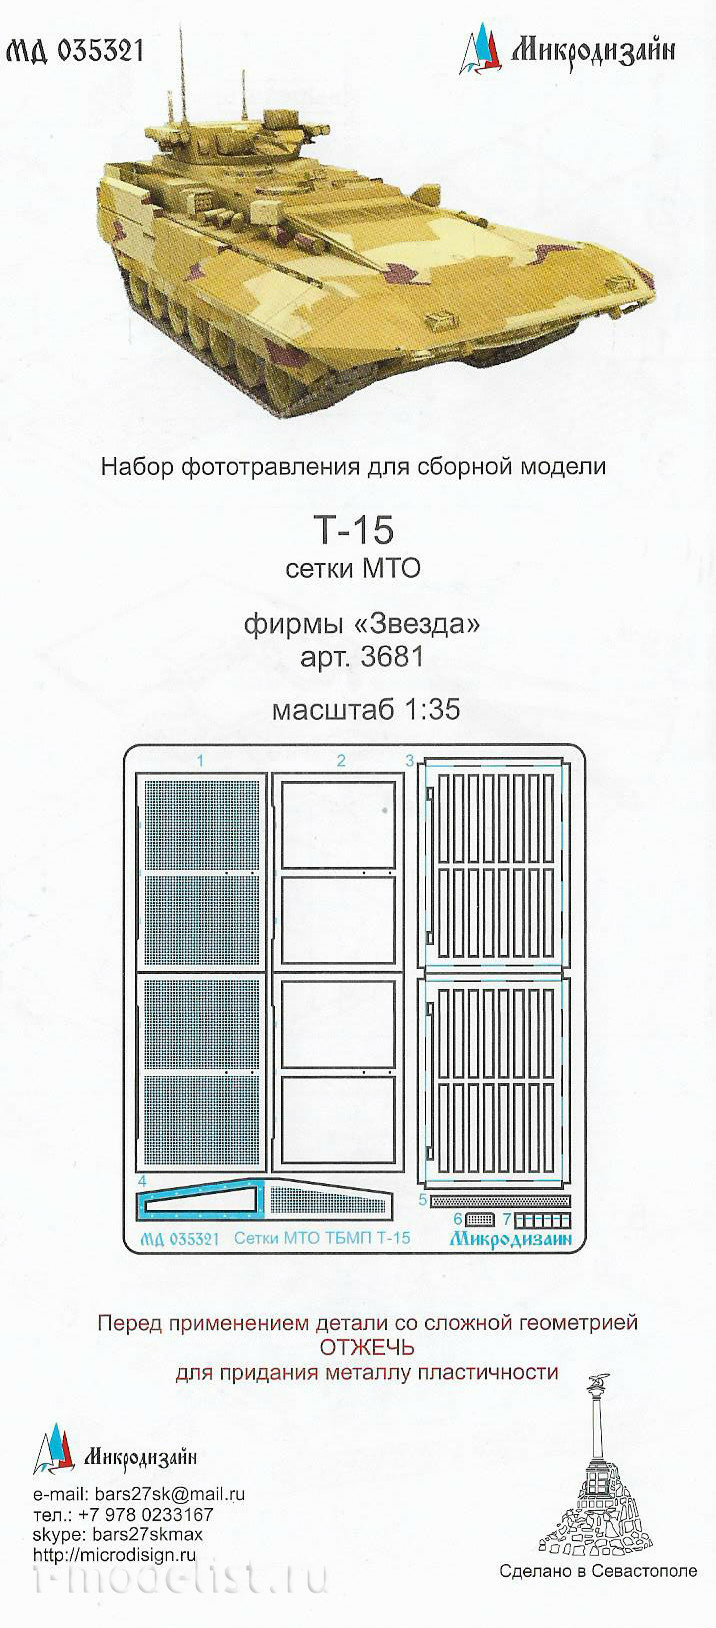 035321 Microdesign BMPT 1/35 T-15 Grid MTO (STAR)